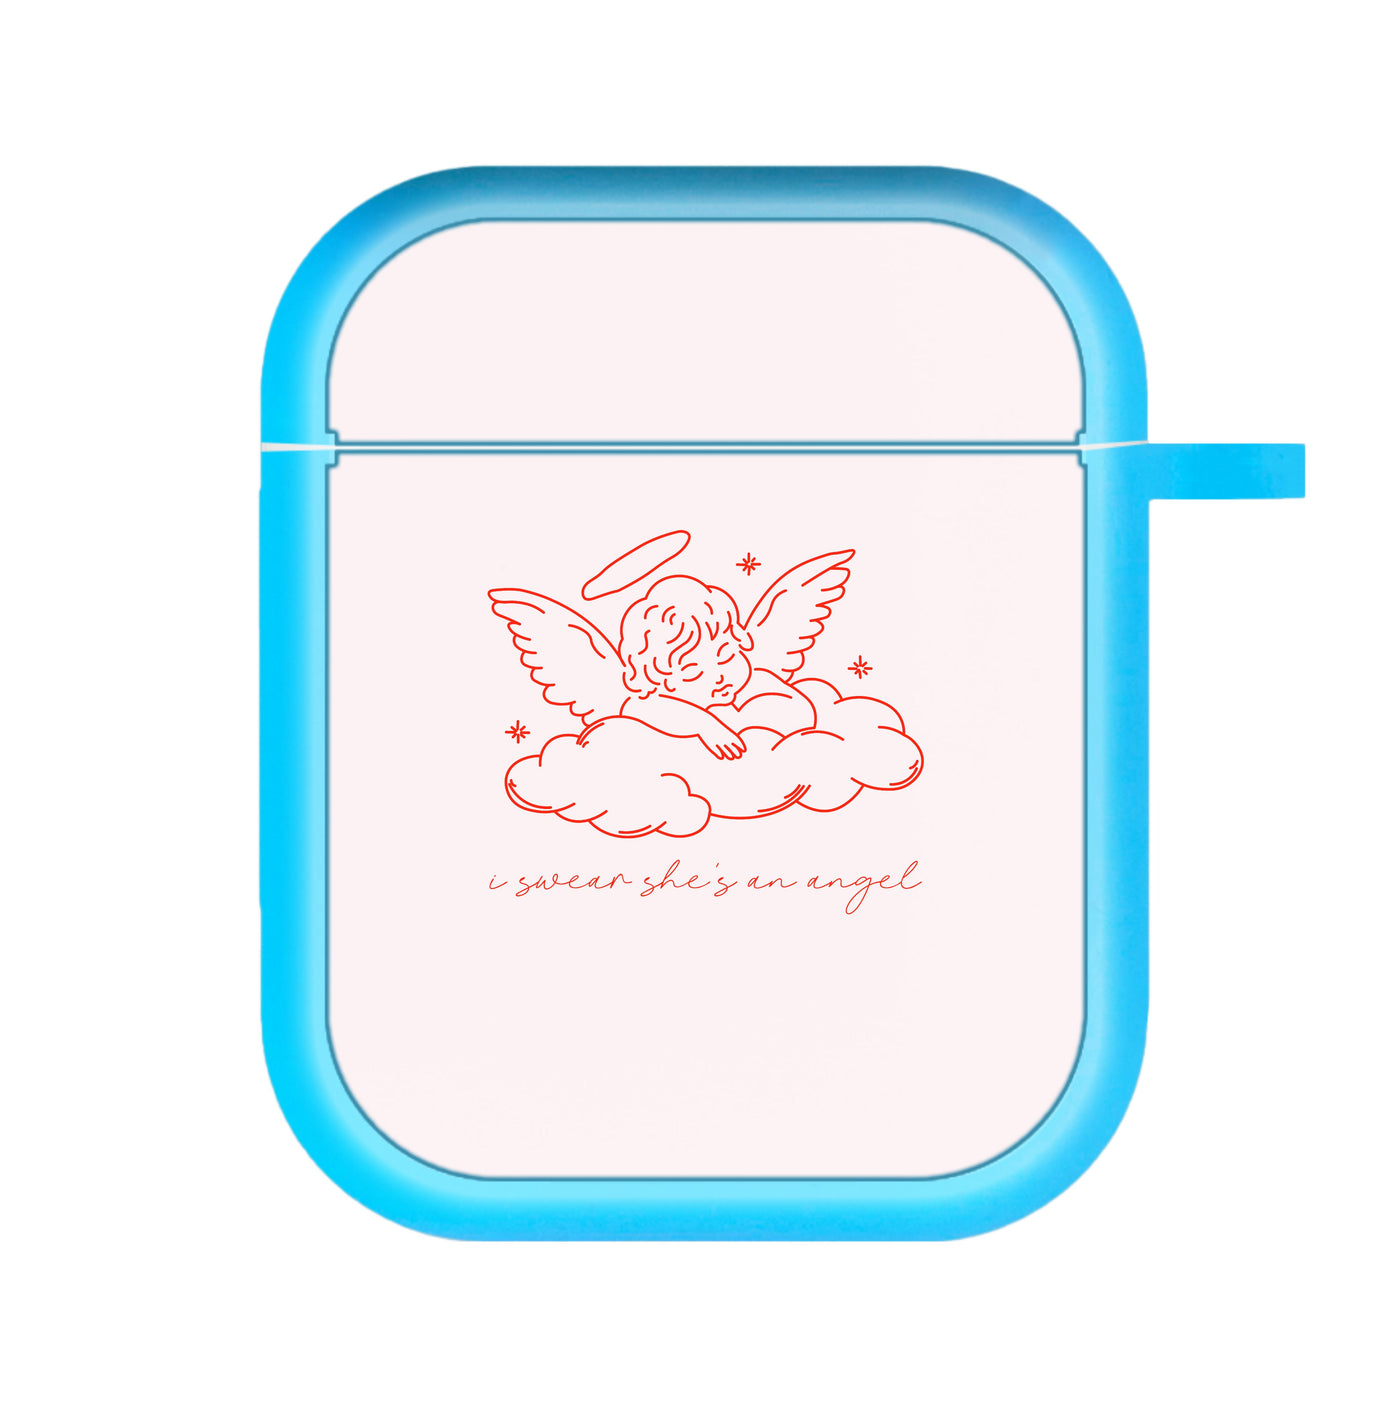 I Swear Shes An Angel - Clean Girl Aesthetic AirPods Case